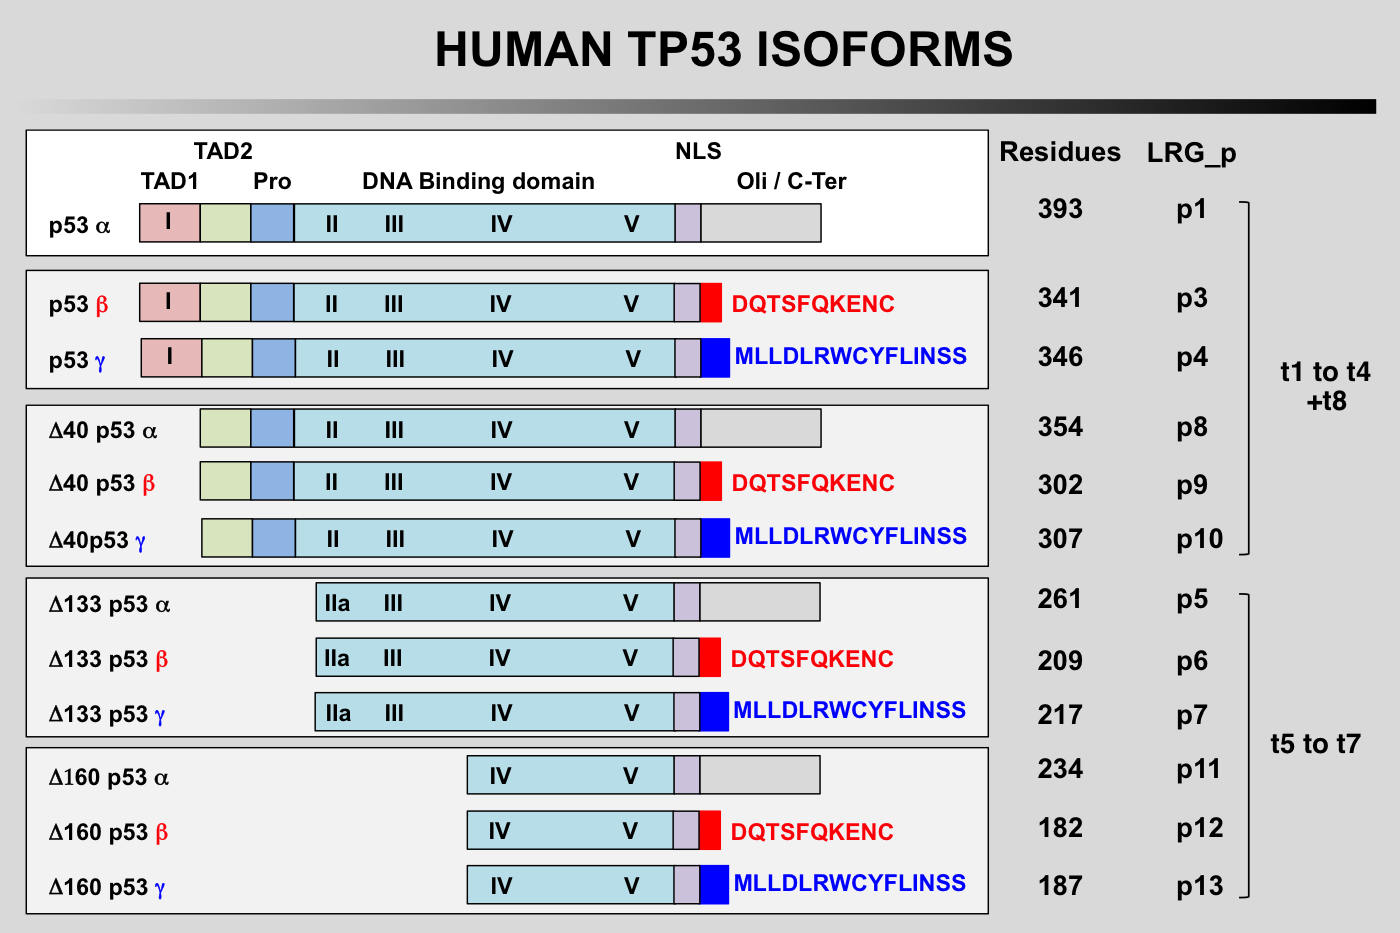 TP53 isoforms 1